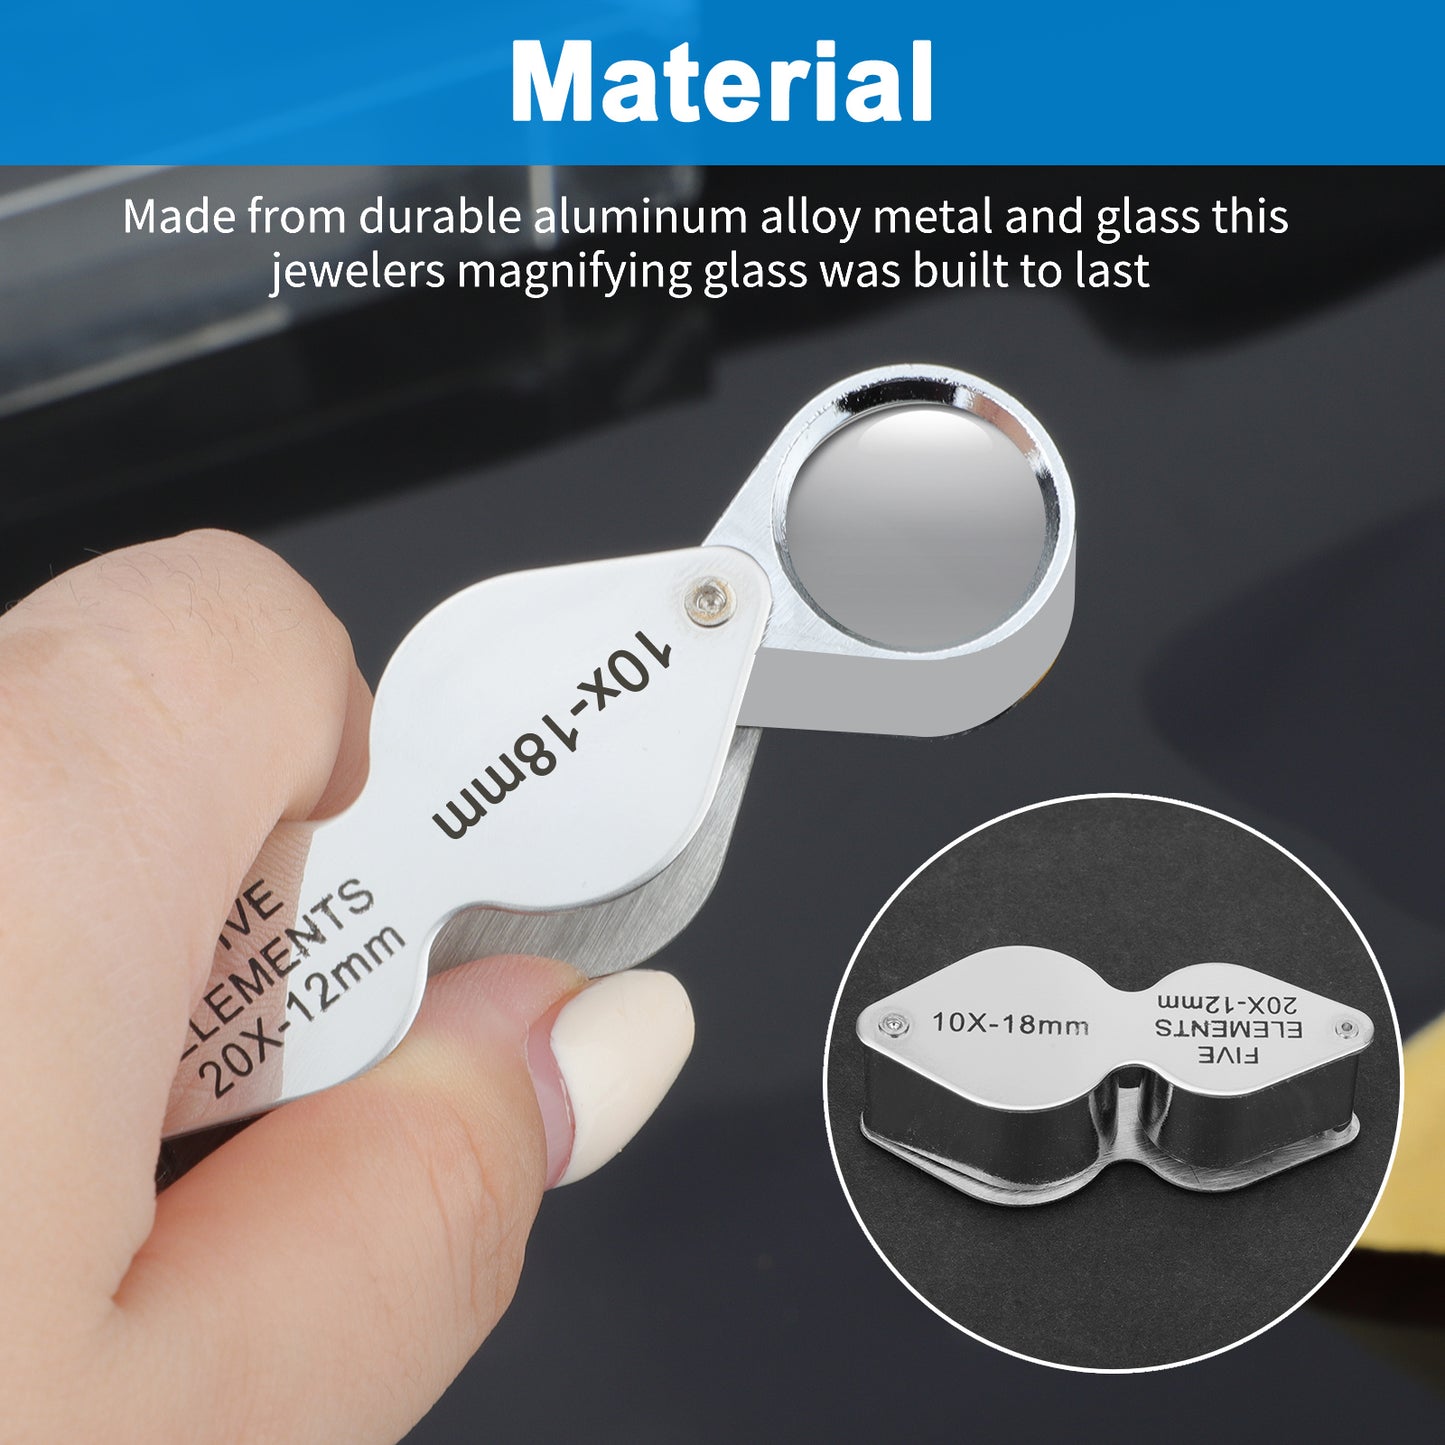 Folding Pocket Magnifier - Professional 10X 20X Jewelers Loupe with Real Glass Lens